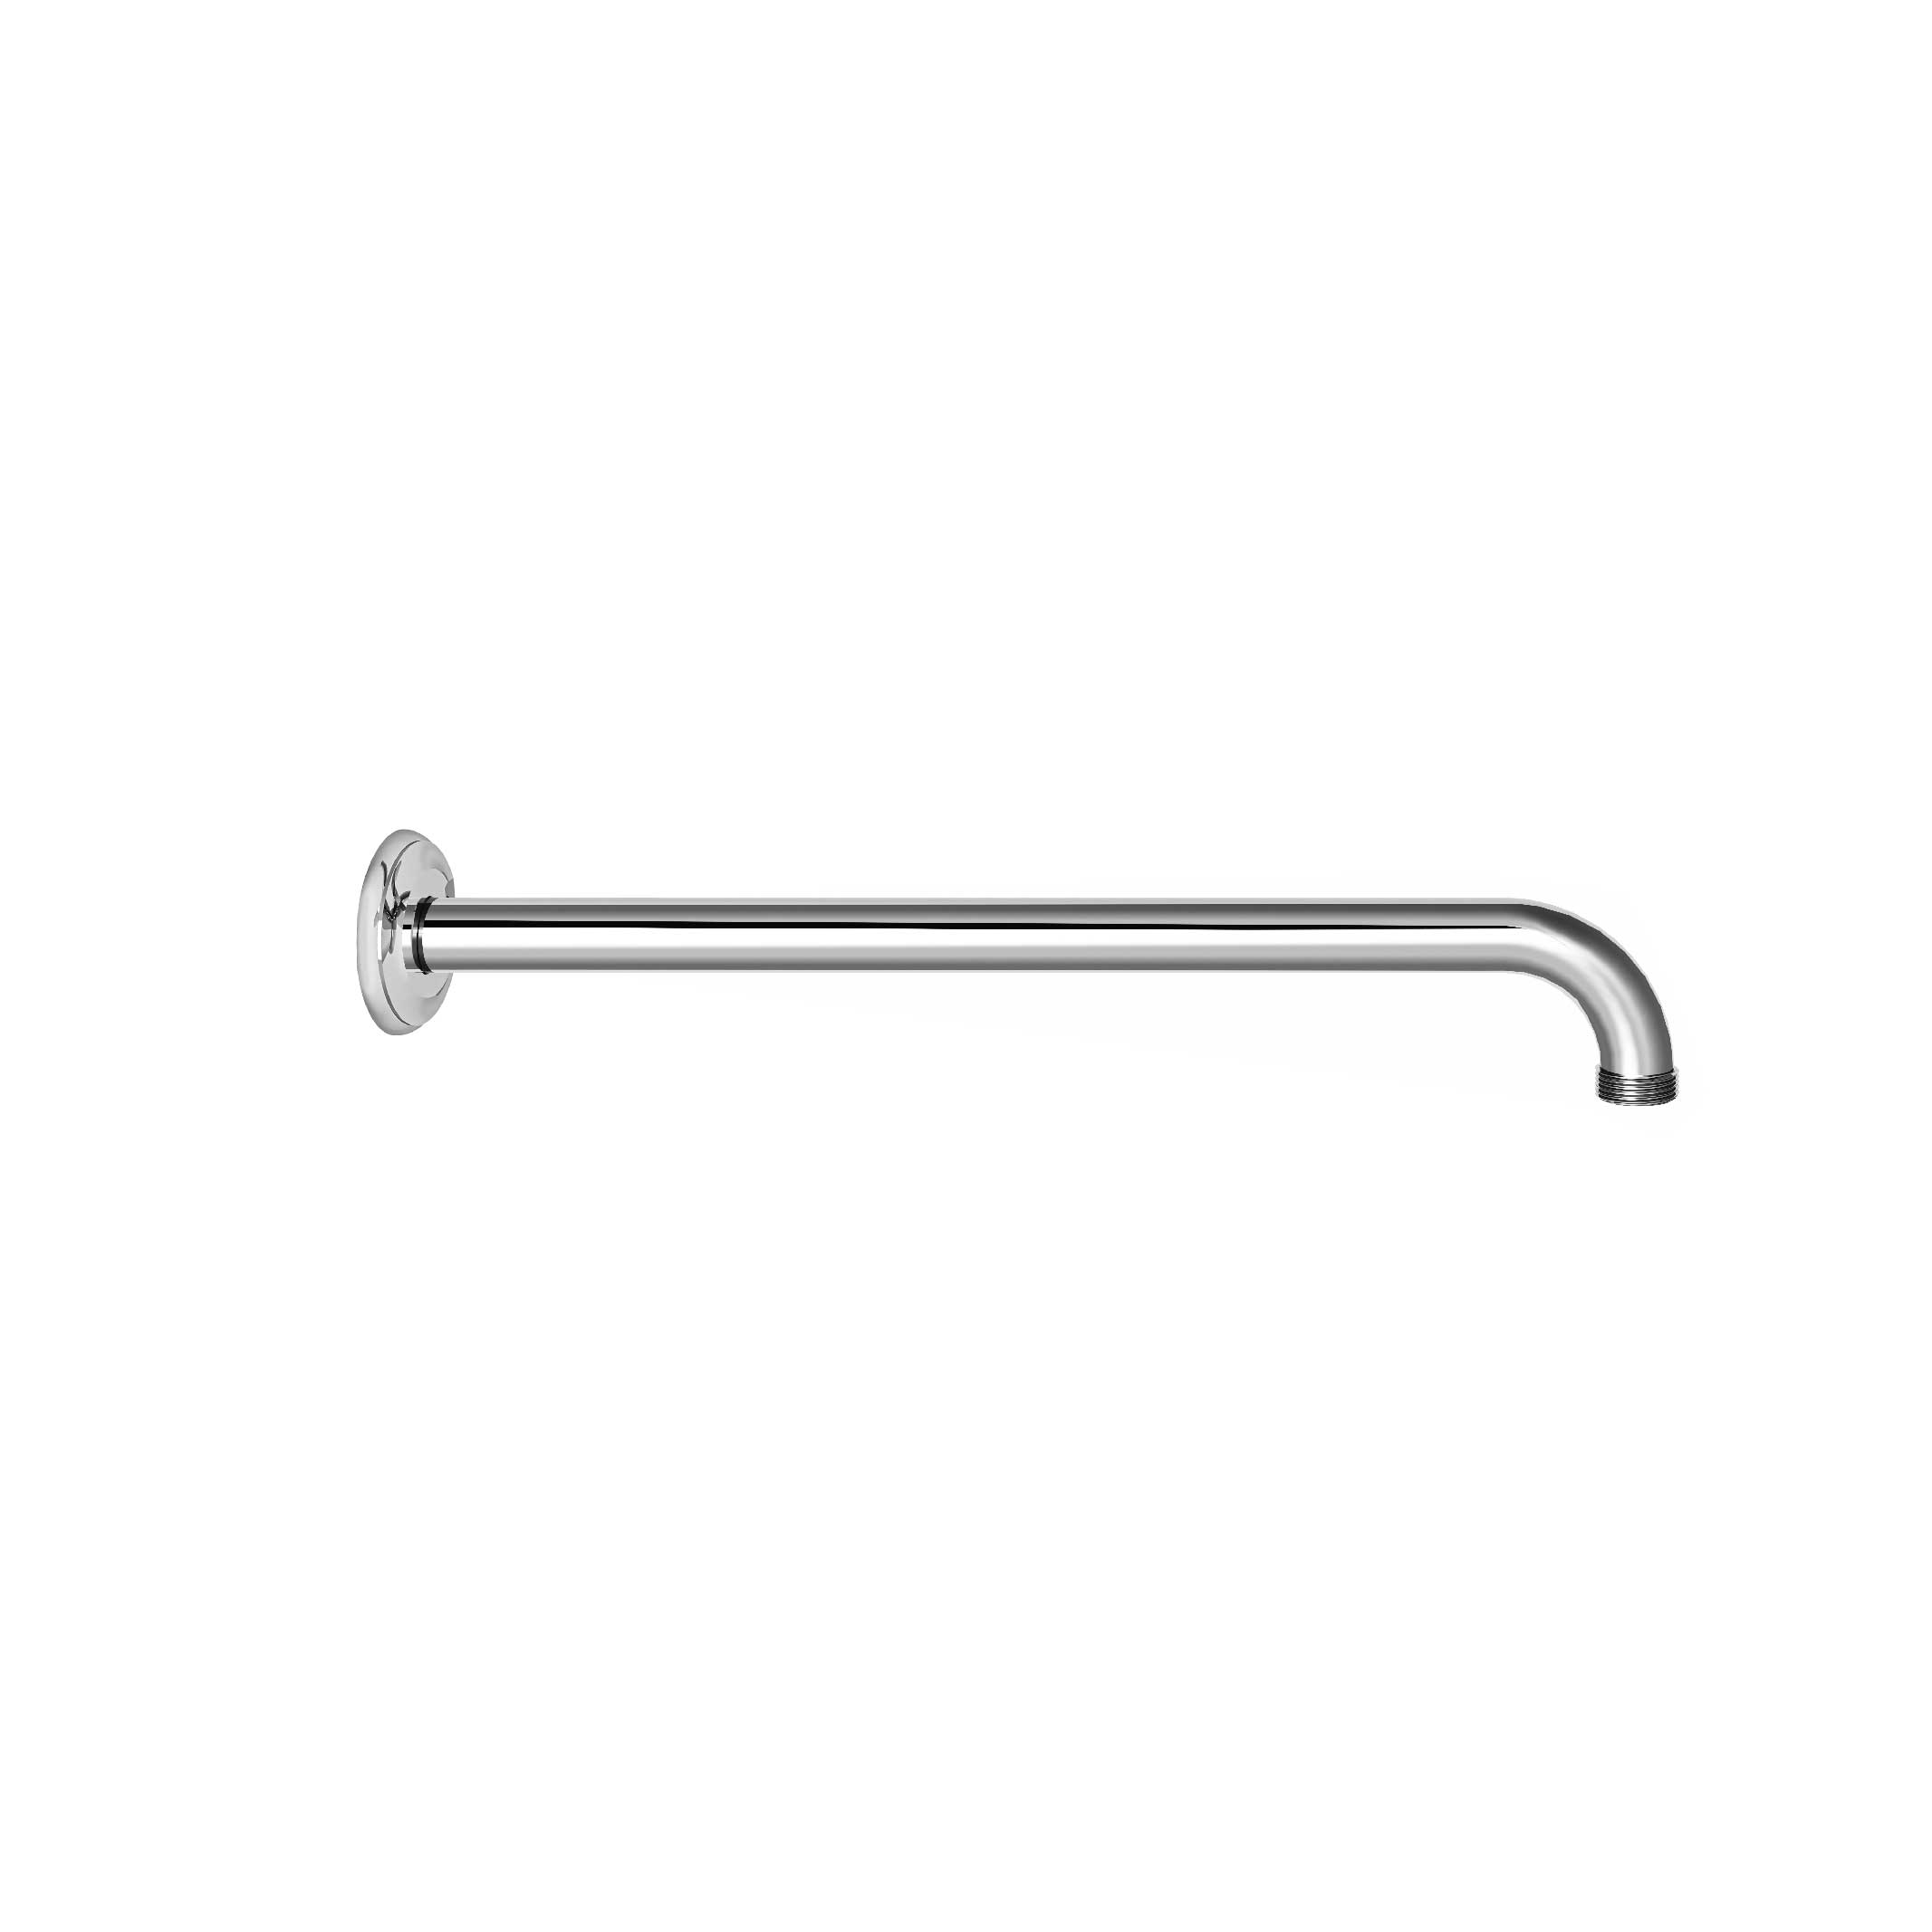 M40-2W301 Wall mounted shower arm 300mm